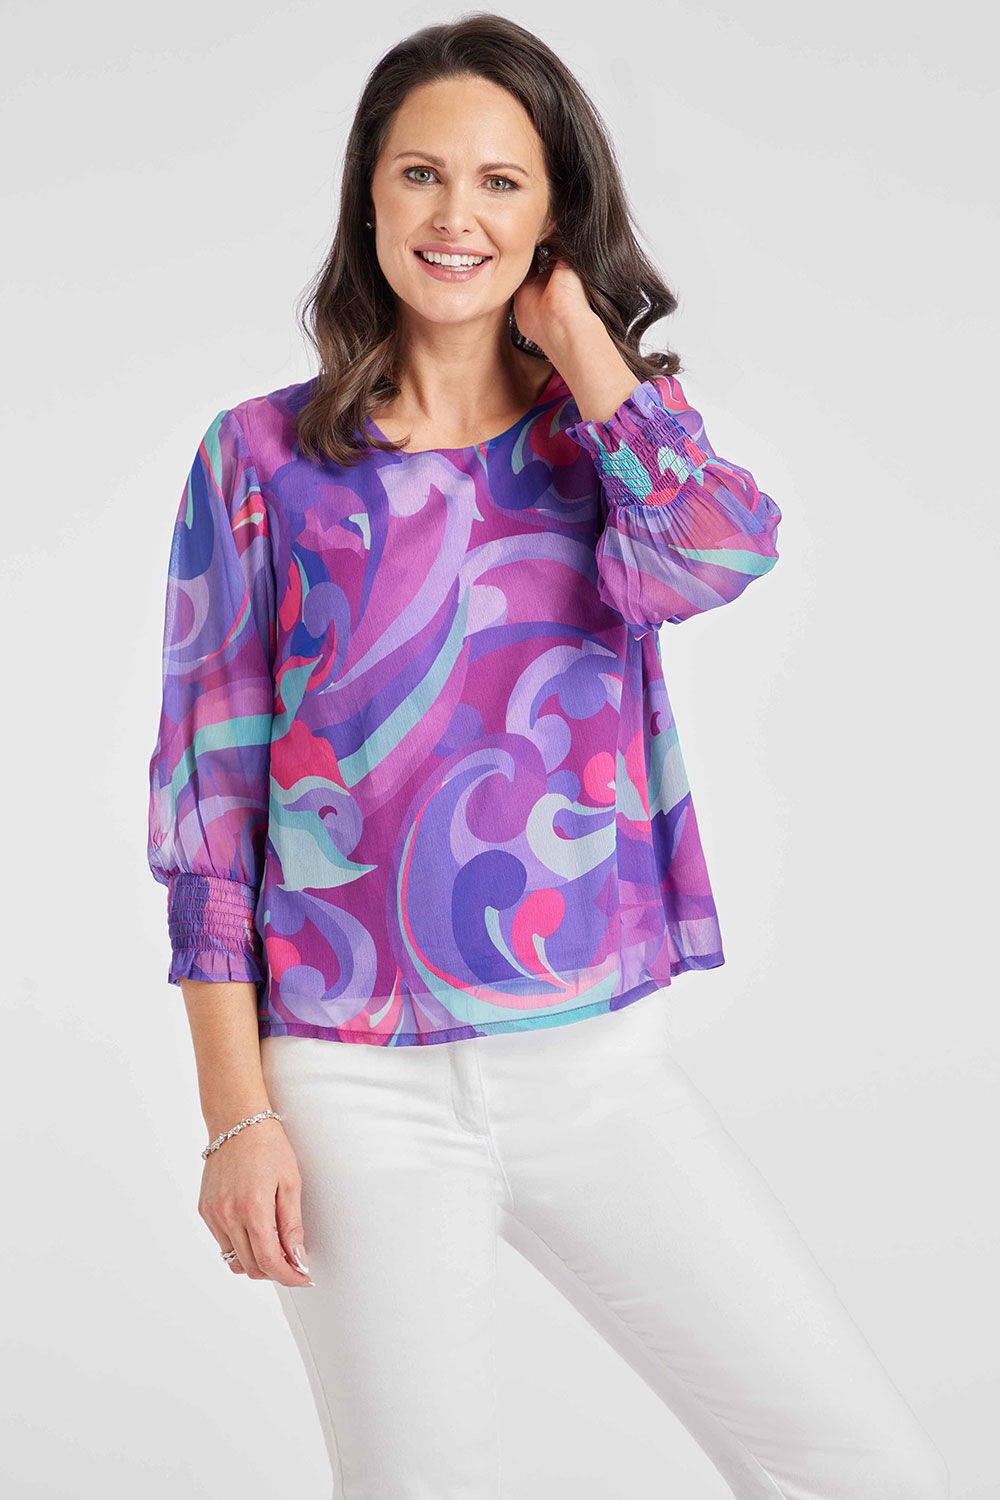 Bonmarche Purple/pink 3/4 Sleeve Floral Swirl Printed Blouse, Size: 14